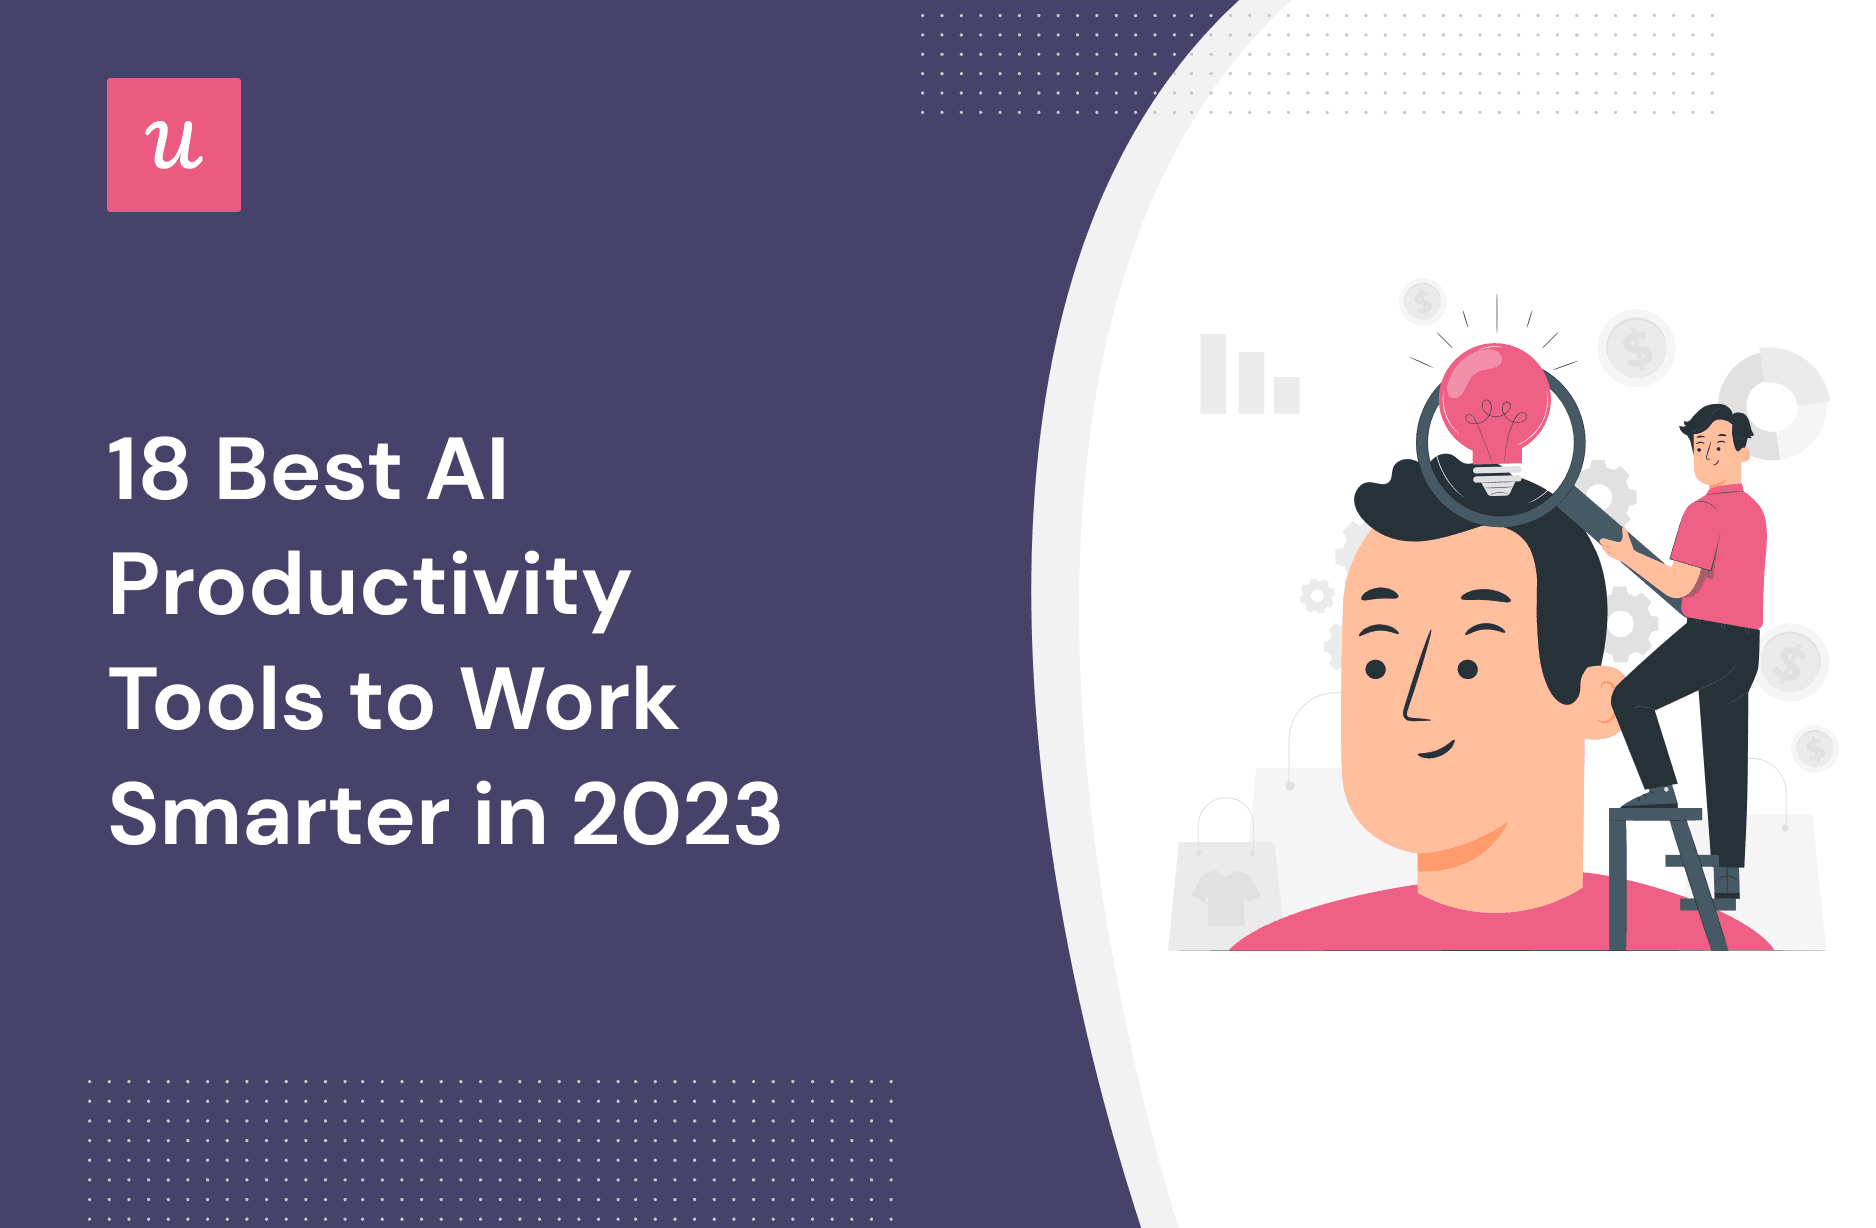 18 Best AI Productivity Tools to Work Smarter in 2023 cover